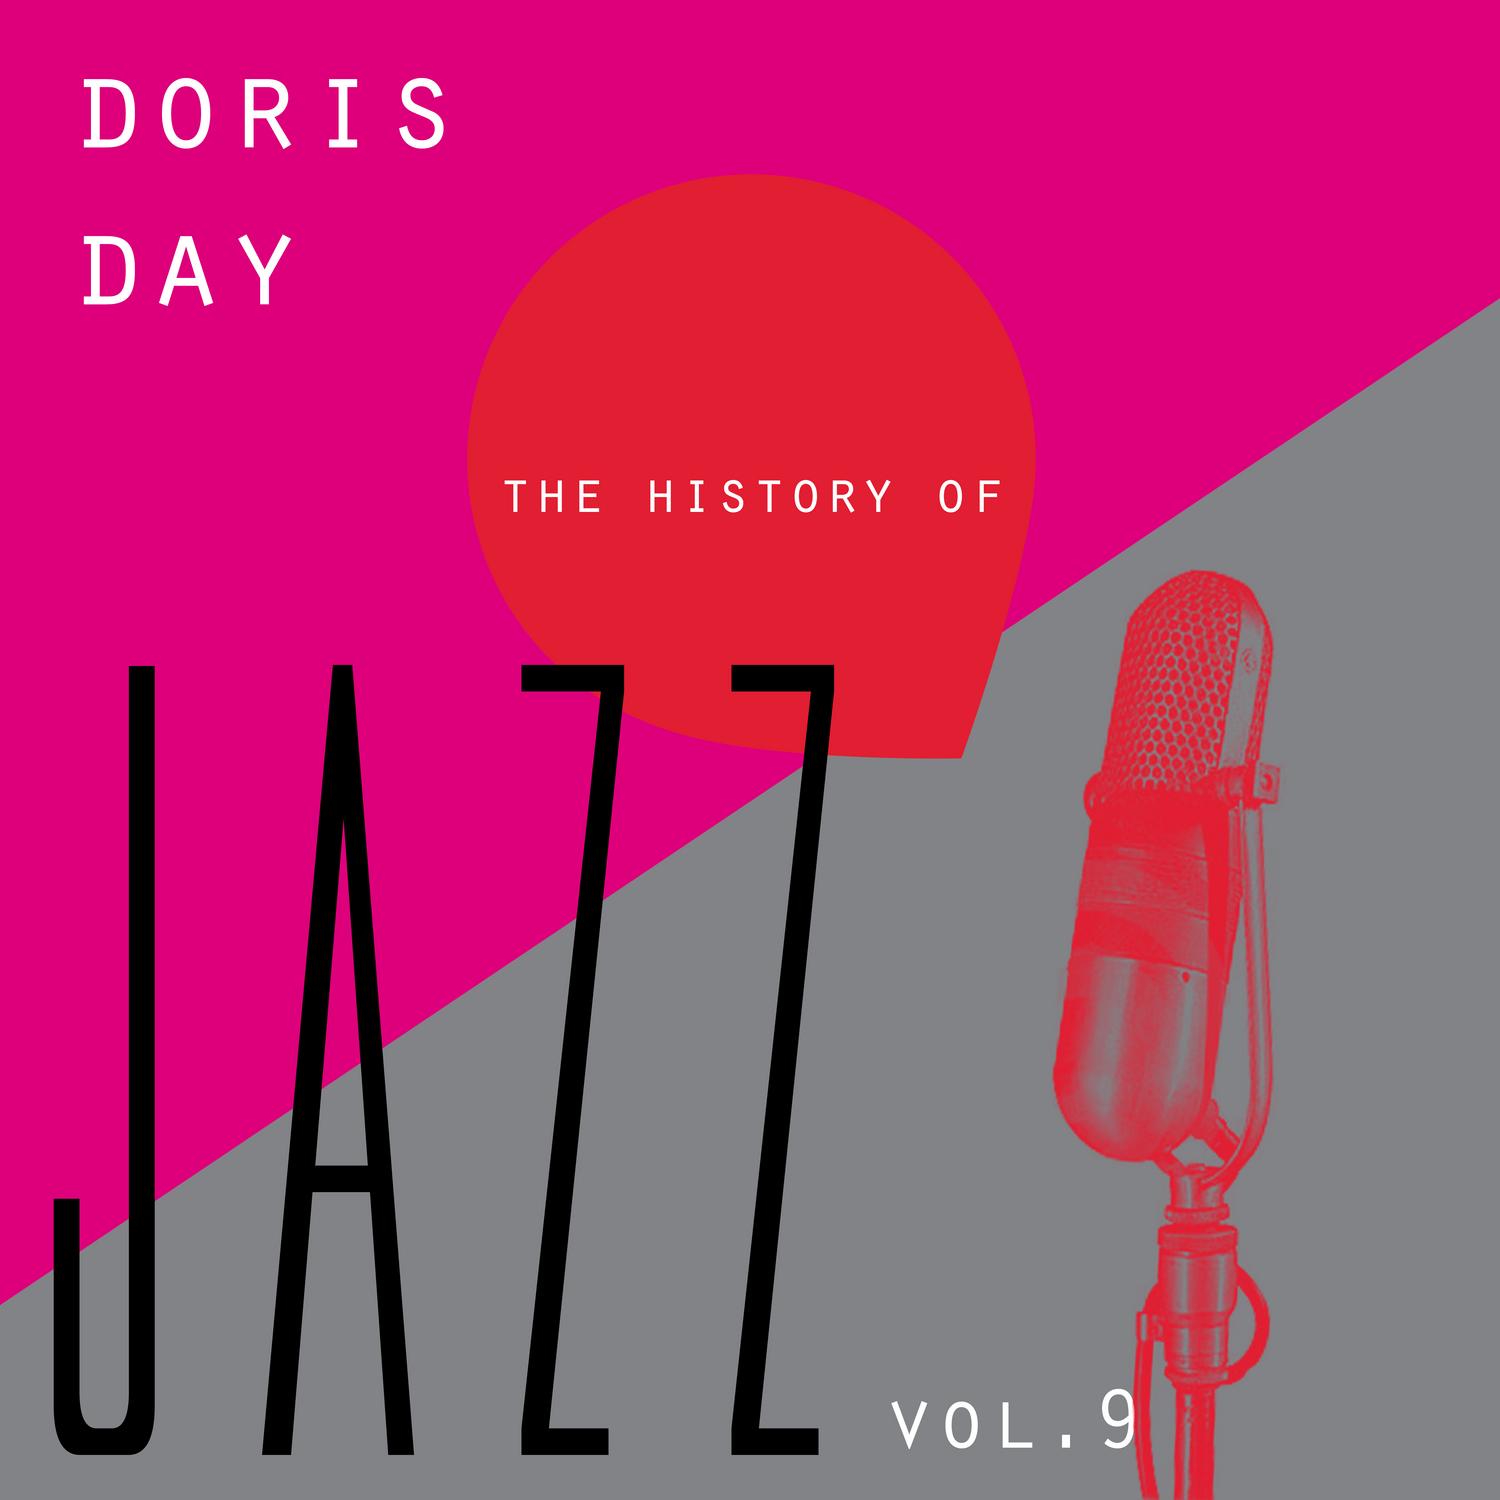 The History of Jazz Vol. 9